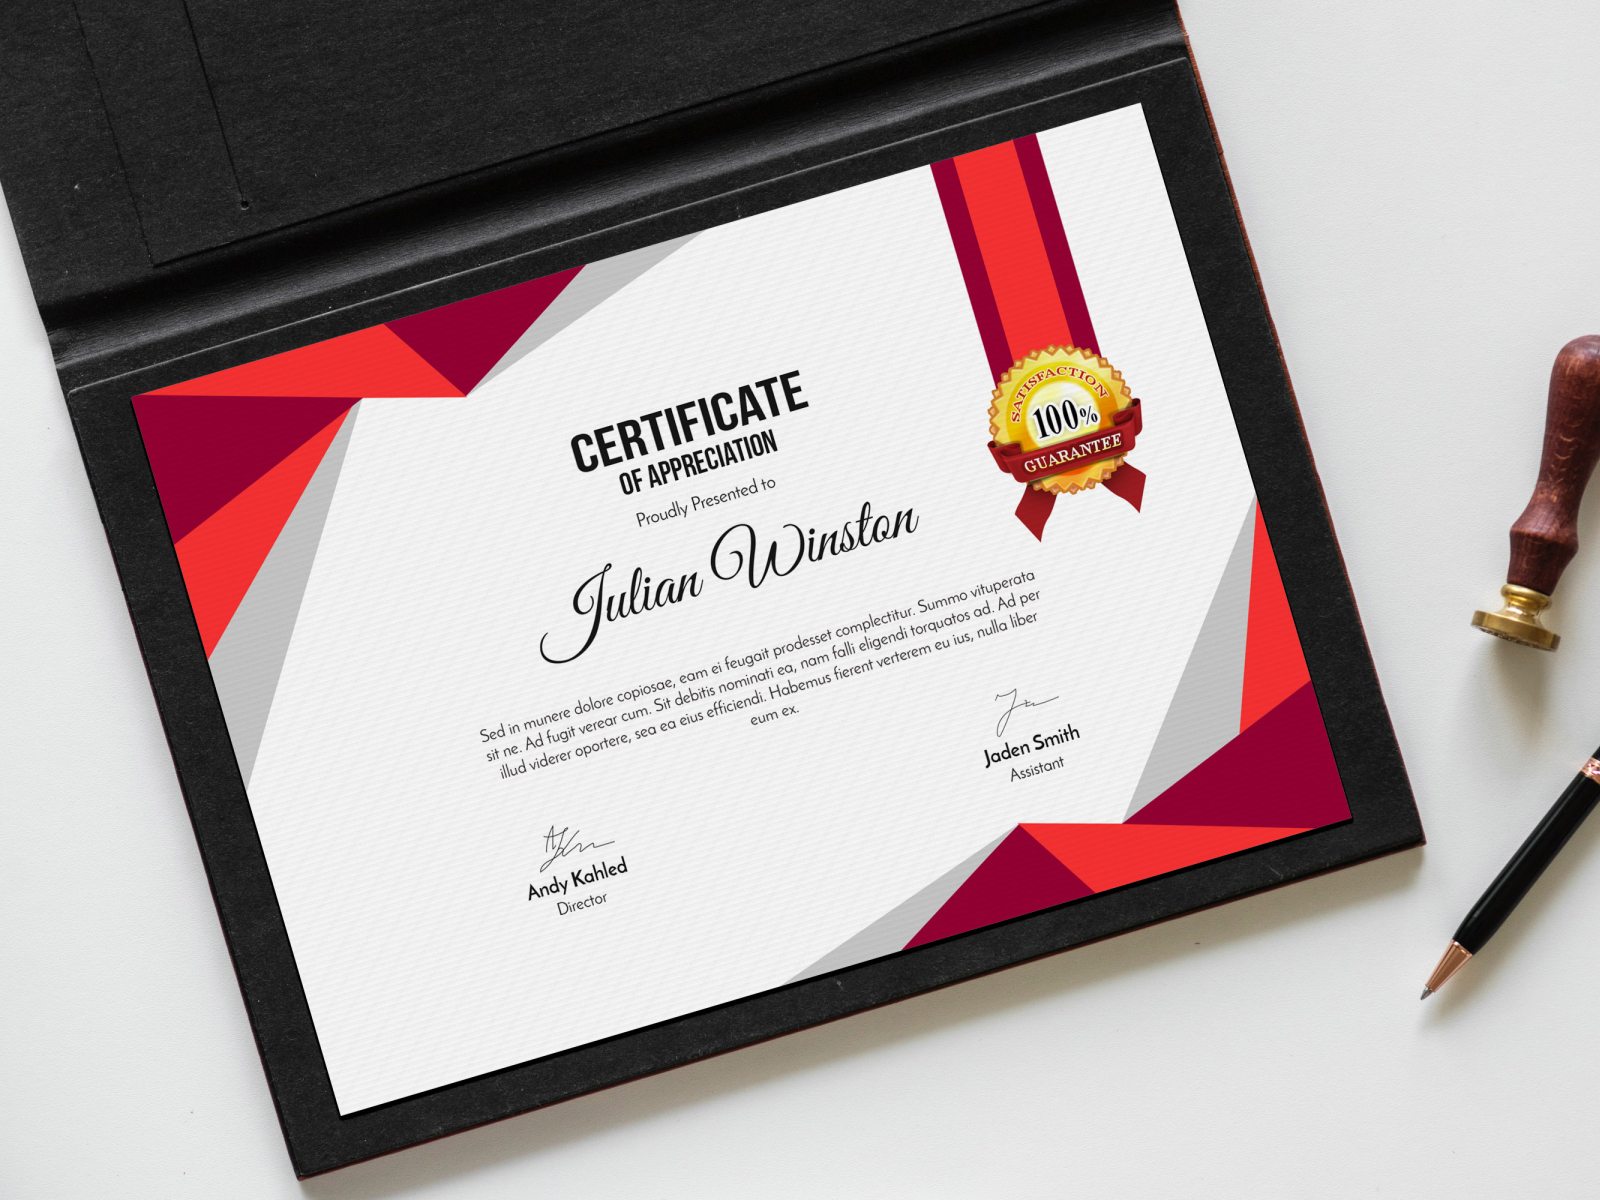 Download Free Certificate Mockup PSD by Shamim Ahammed on Dribbble